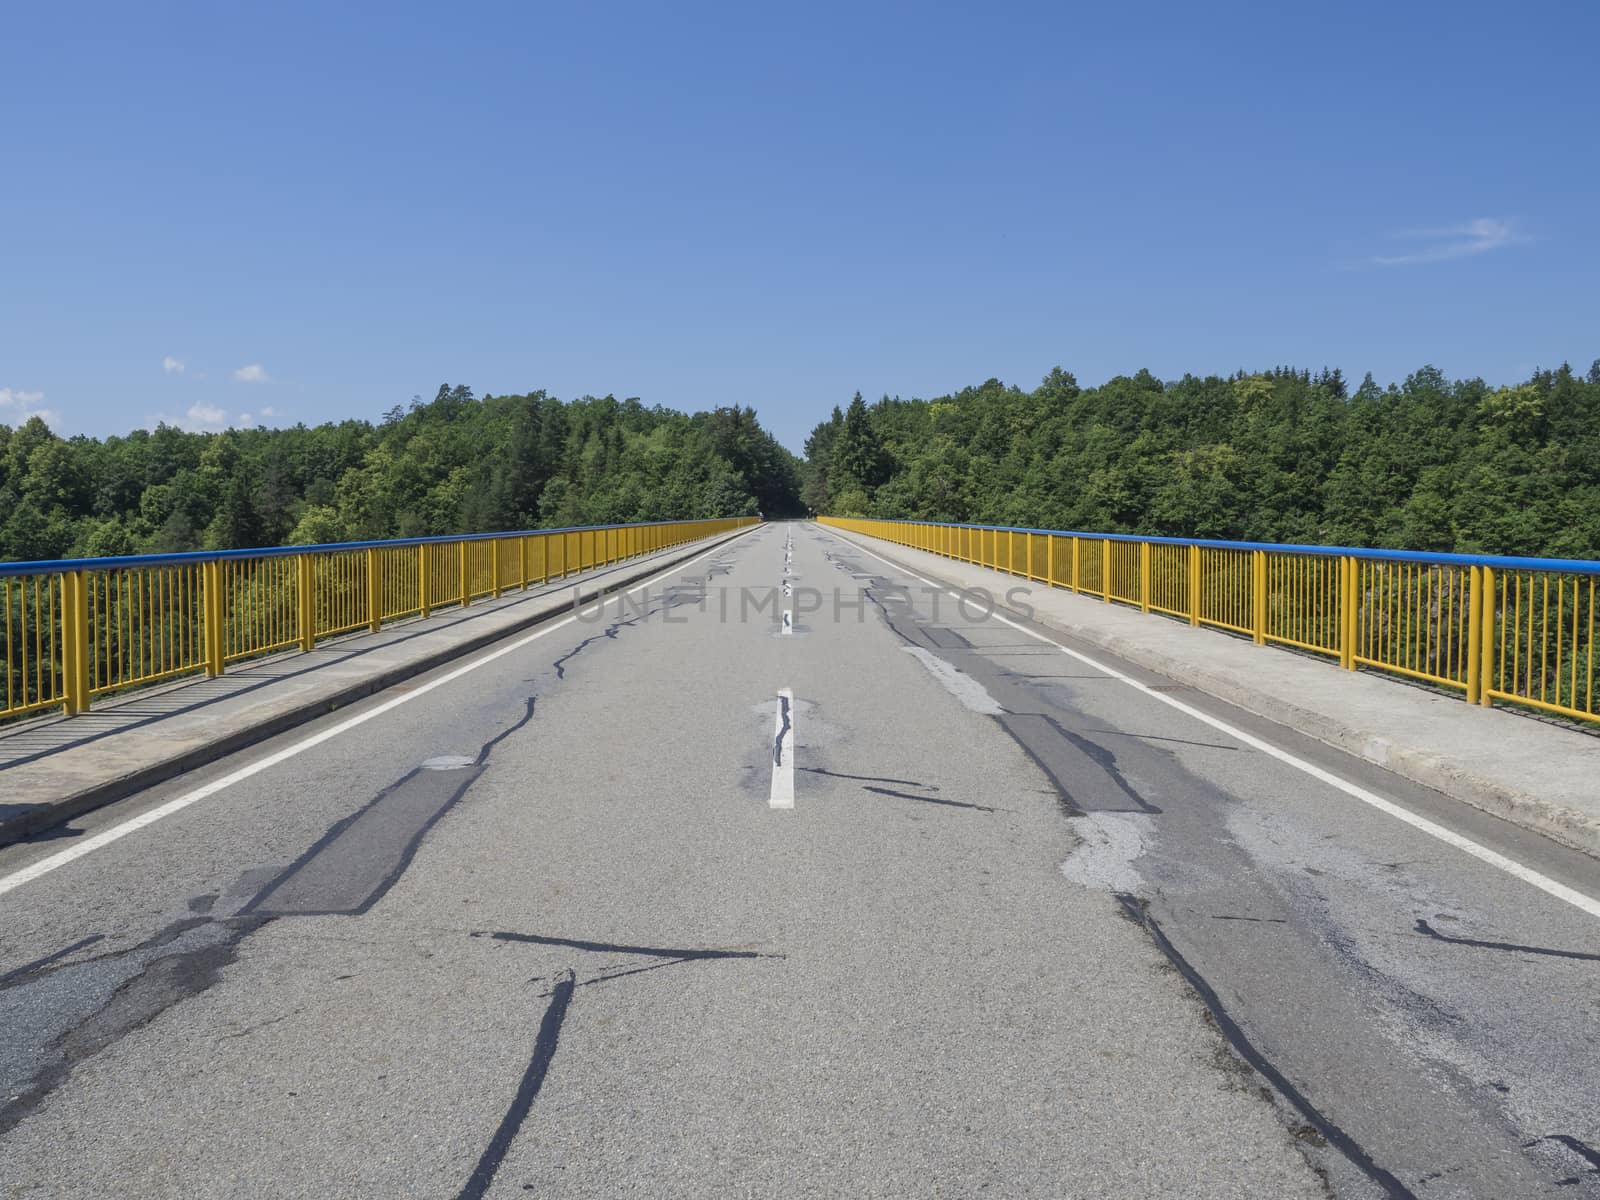 asphalt road on bridge with yellow barrier and green trees in the background, clear blue sky, copy space